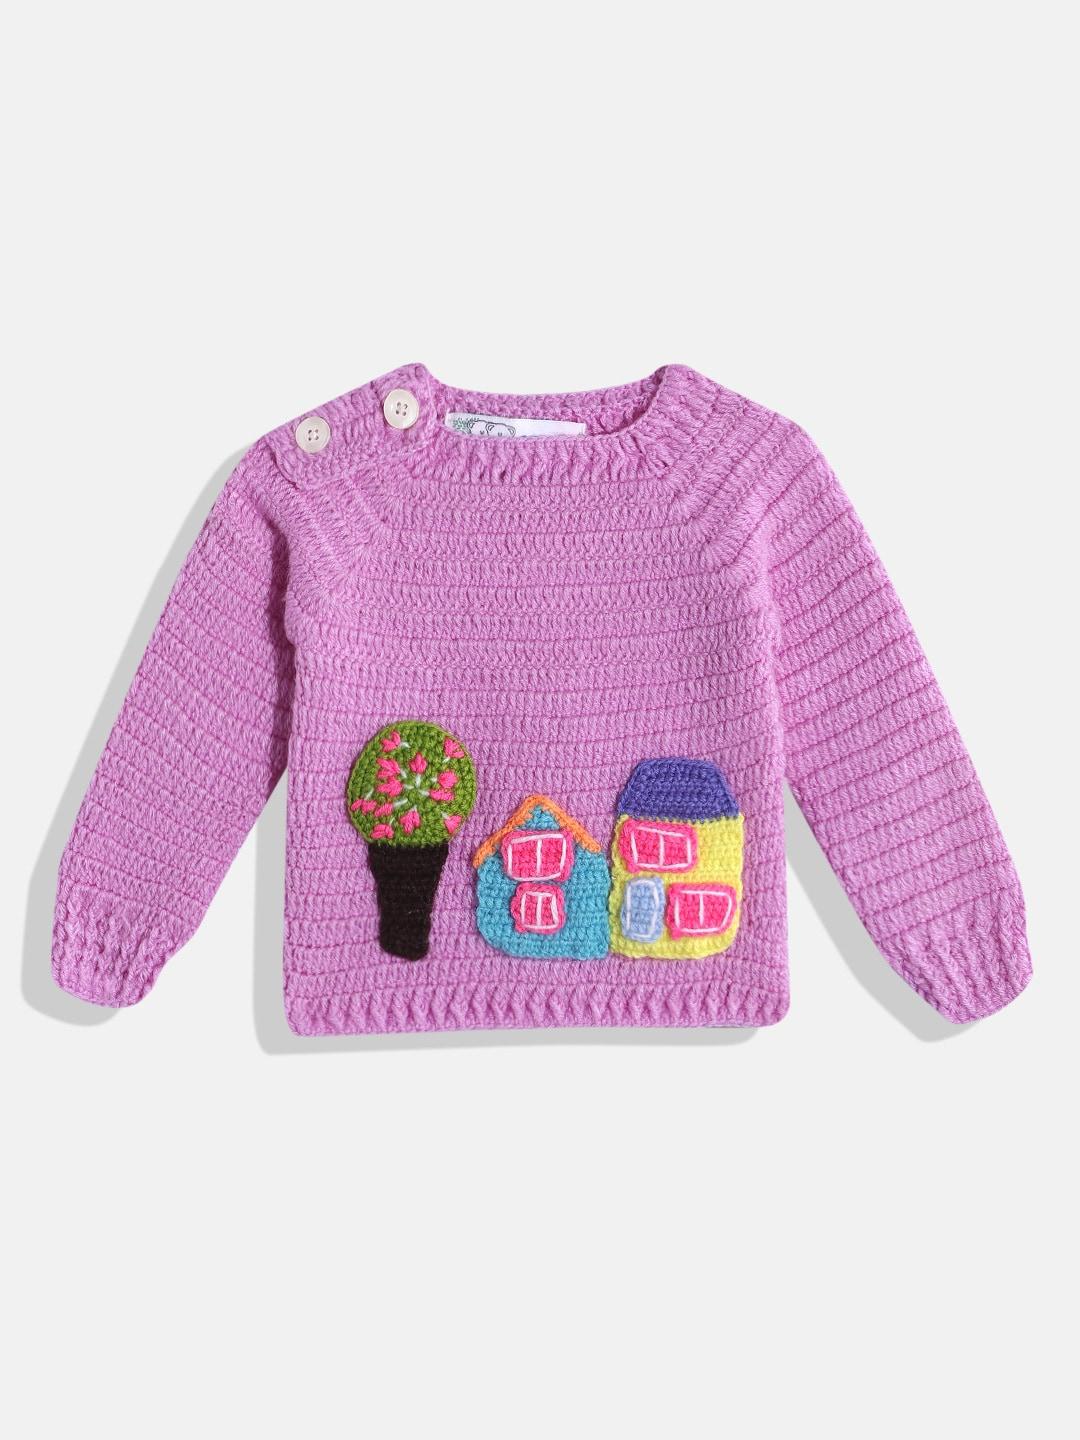 chutput-unisex-kids-knitted-woollen-pullover-with-embroidered-detail